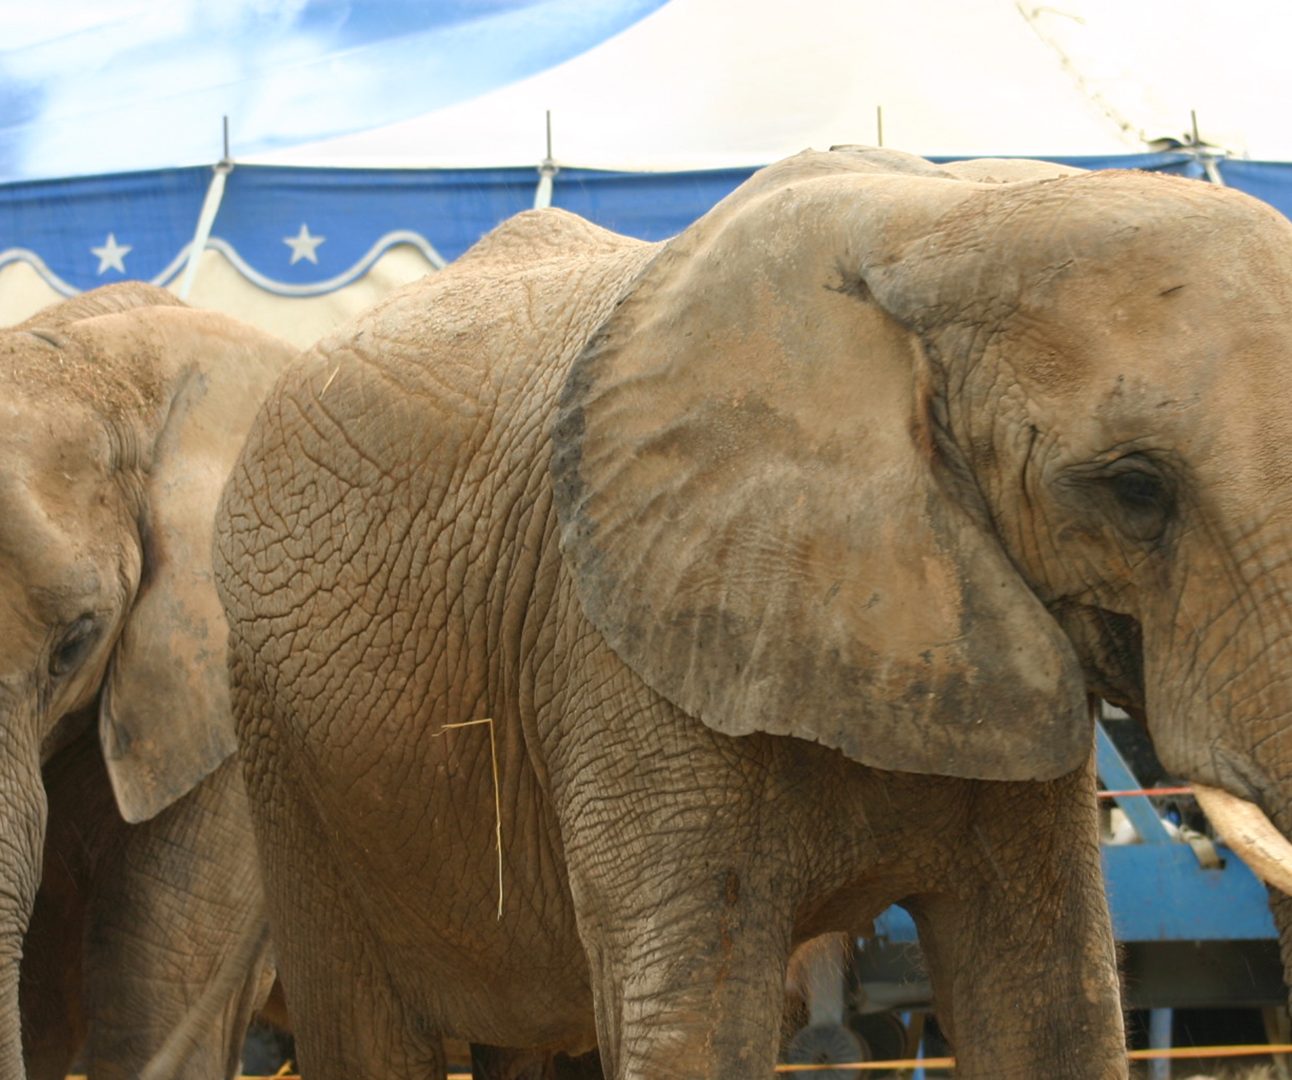 Two elephants stand in front of a circus tent